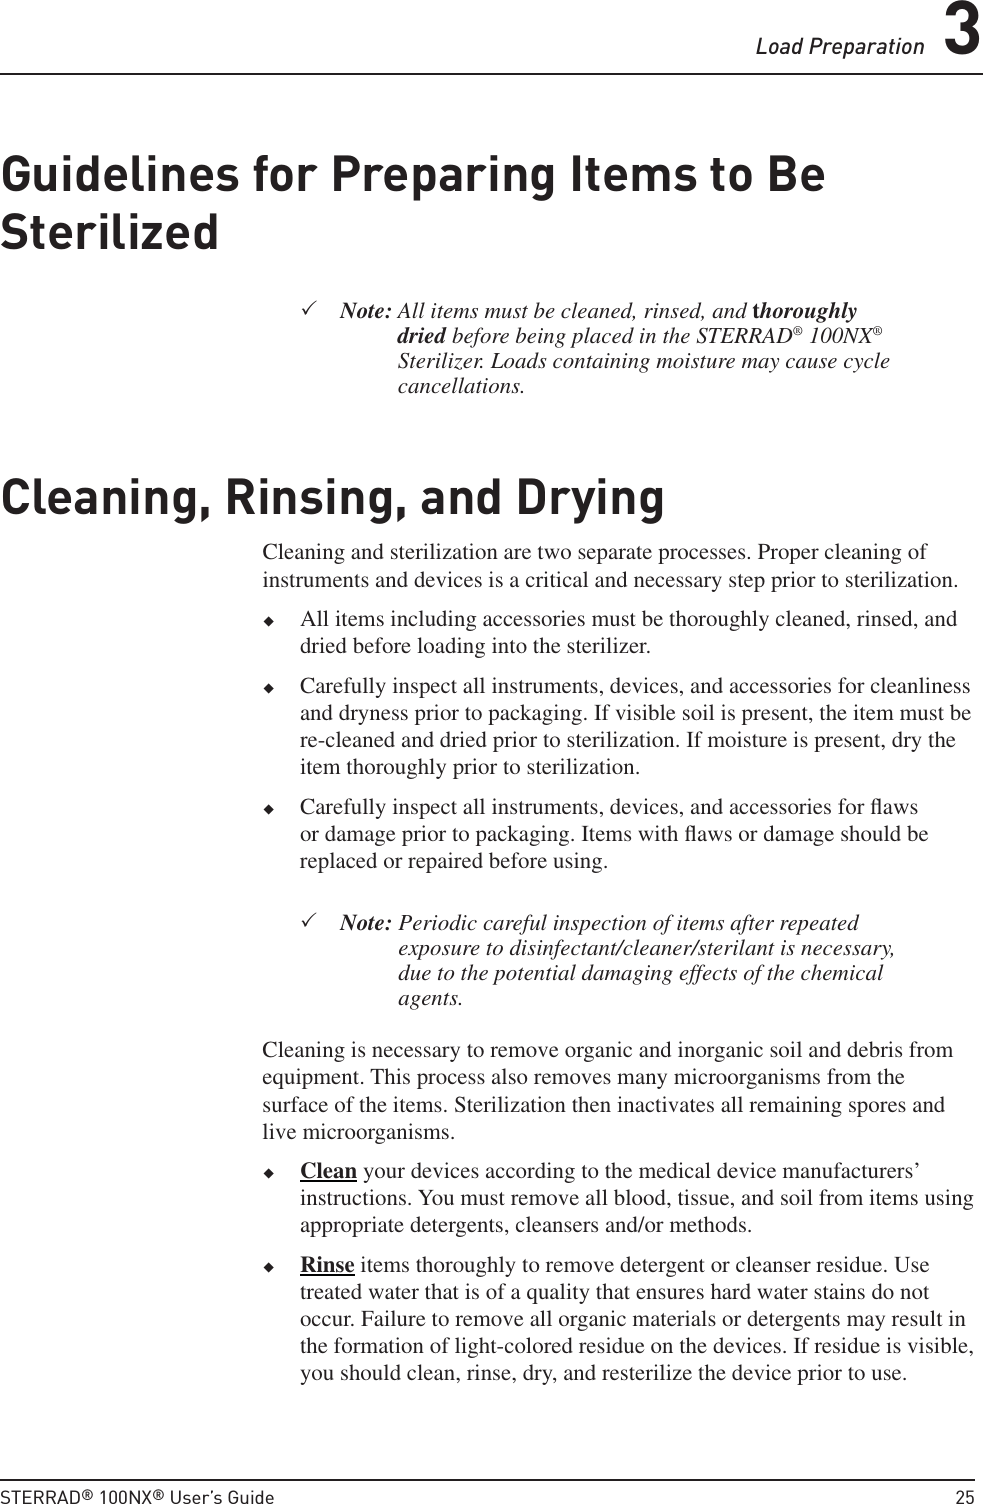 Load Preparation 3STERRAD® 100NX® User’s Guide  25Guidelines for Preparing Items to Be Sterilized Note:  All items must be cleaned, rinsed, and thoroughly dried before being placed in the STERRAD® 100NX® Sterilizer. Loads containing moisture may cause cycle cancellations.Cleaning, Rinsing, and DryingCleaning and sterilization are two separate processes. Proper cleaning of instruments and devices is a critical and necessary step prior to sterilization. All items including accessories must be thoroughly cleaned, rinsed, and dried before loading into the sterilizer.  Carefully inspect all instruments, devices, and accessories for cleanliness and dryness prior to packaging. If visible soil is present, the item must be re-cleaned and dried prior to sterilization. If moisture is present, dry the item thoroughly prior to sterilization. Carefully inspect all instruments, devices, and accessories for ﬂ aws or damage prior to packaging. Items with ﬂ aws or damage should be replaced or repaired before using. Note:  Periodic careful inspection of items after repeated exposure to disinfectant/cleaner/sterilant is necessary, due to the potential damaging effects of the chemical agents.Cleaning is necessary to remove organic and inorganic soil and debris from equipment. This process also removes many microorganisms from the surface of the items. Sterilization then inactivates all remaining spores and live microorganisms. Clean your devices according to the medical device manufacturers’ instructions. You must remove all blood, tissue, and soil from items using appropriate detergents, cleansers and/or methods.  Rinse items thoroughly to remove detergent or cleanser residue. Use treated water that is of a quality that ensures hard water stains do not occur. Failure to remove all organic materials or detergents may result in the formation of light-colored residue on the devices. If residue is visible, you should clean, rinse, dry, and resterilize the device prior to use.